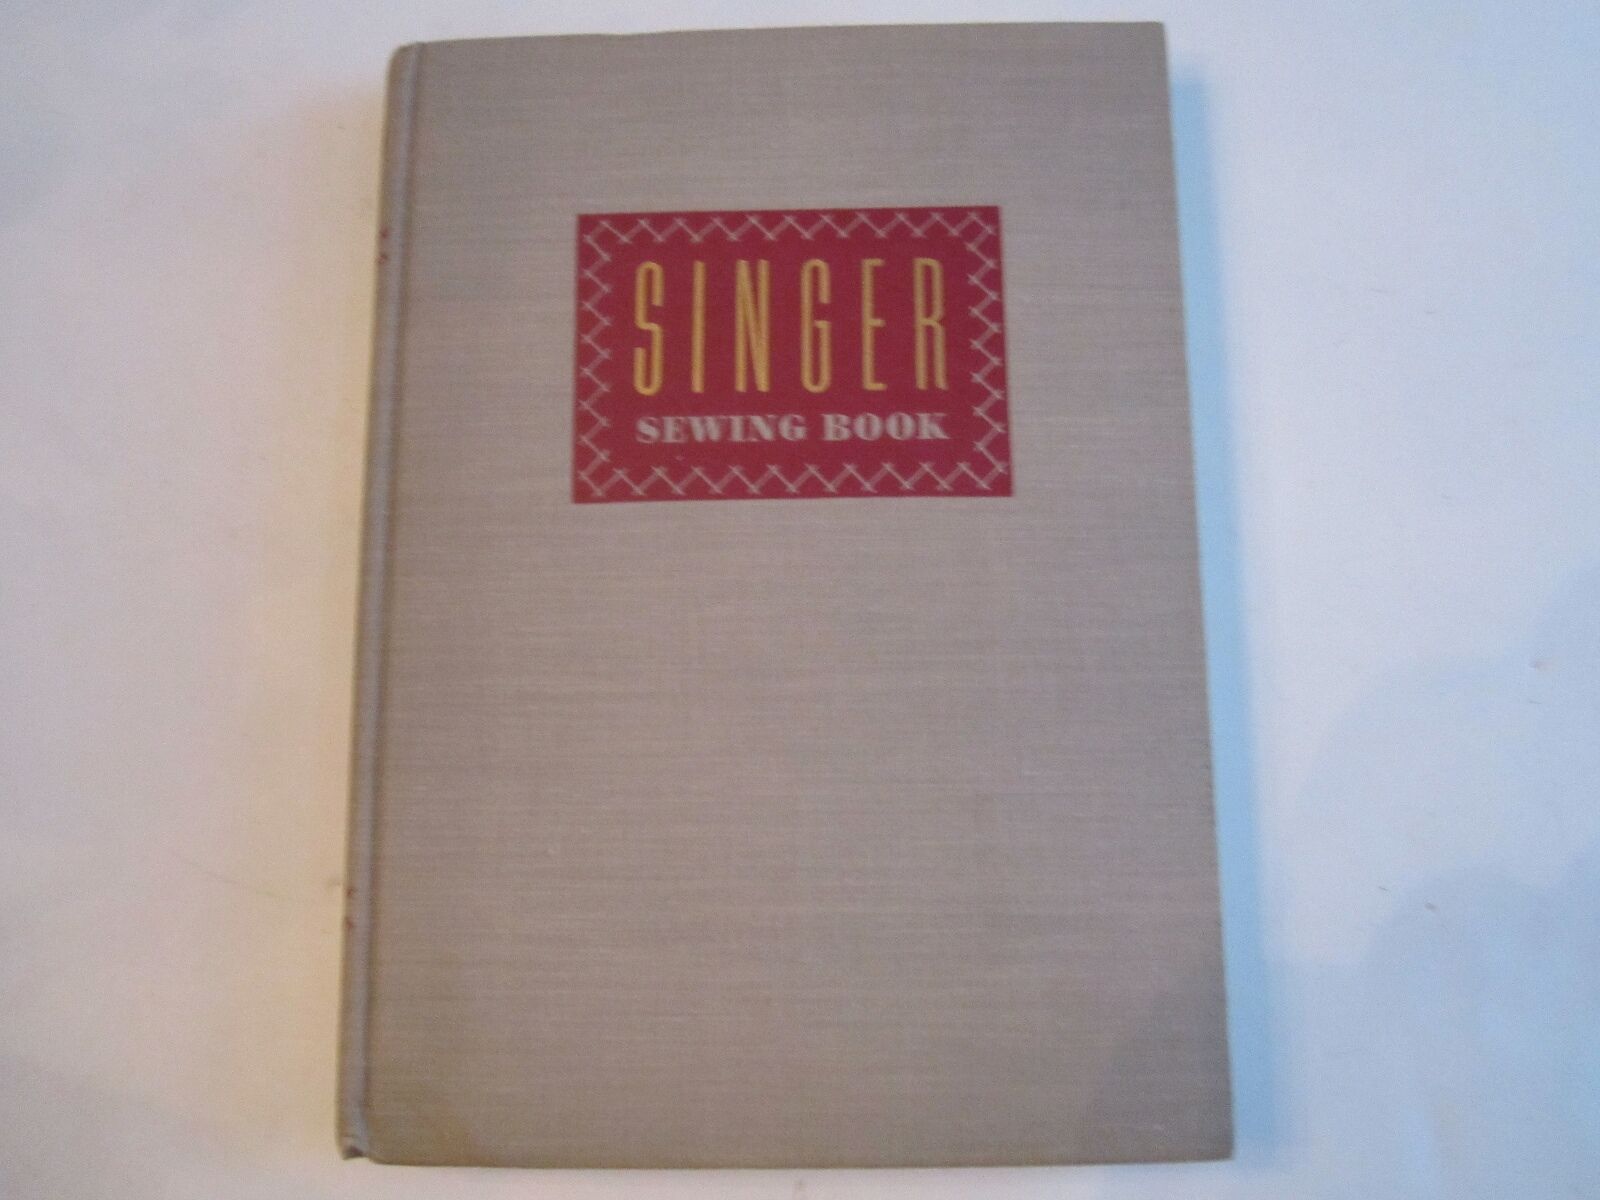 1949 SINGER SEWING BOOK BY PICKEN - VERY NICE CONDITION - BB-3A